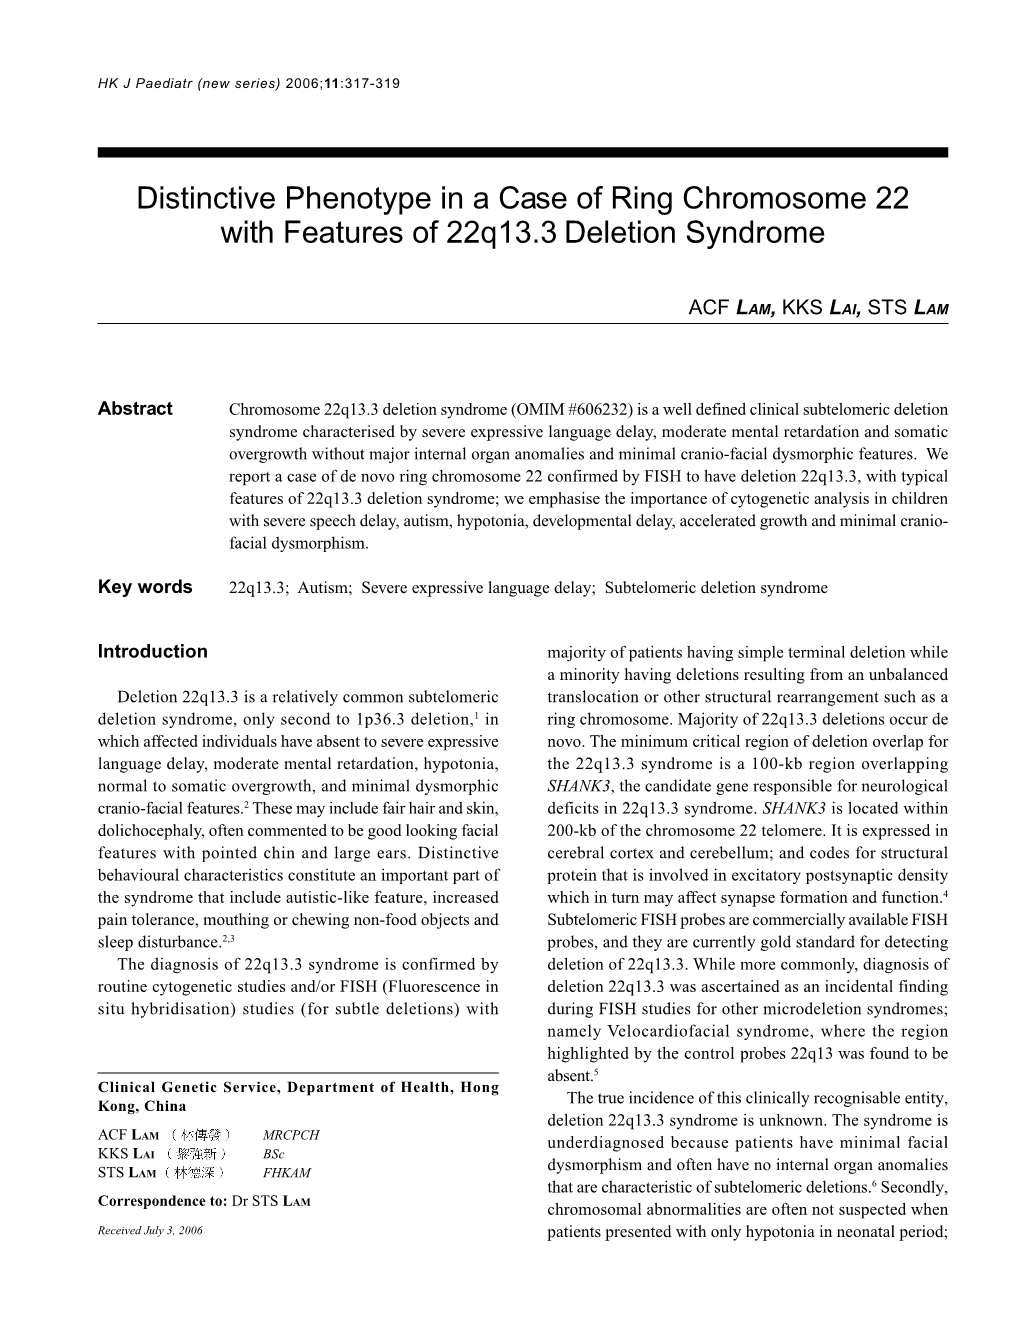 Distinctive Phenotype in a Case of Ring Chromosome 22 with Features of 22Q13.3 Deletion Syndrome